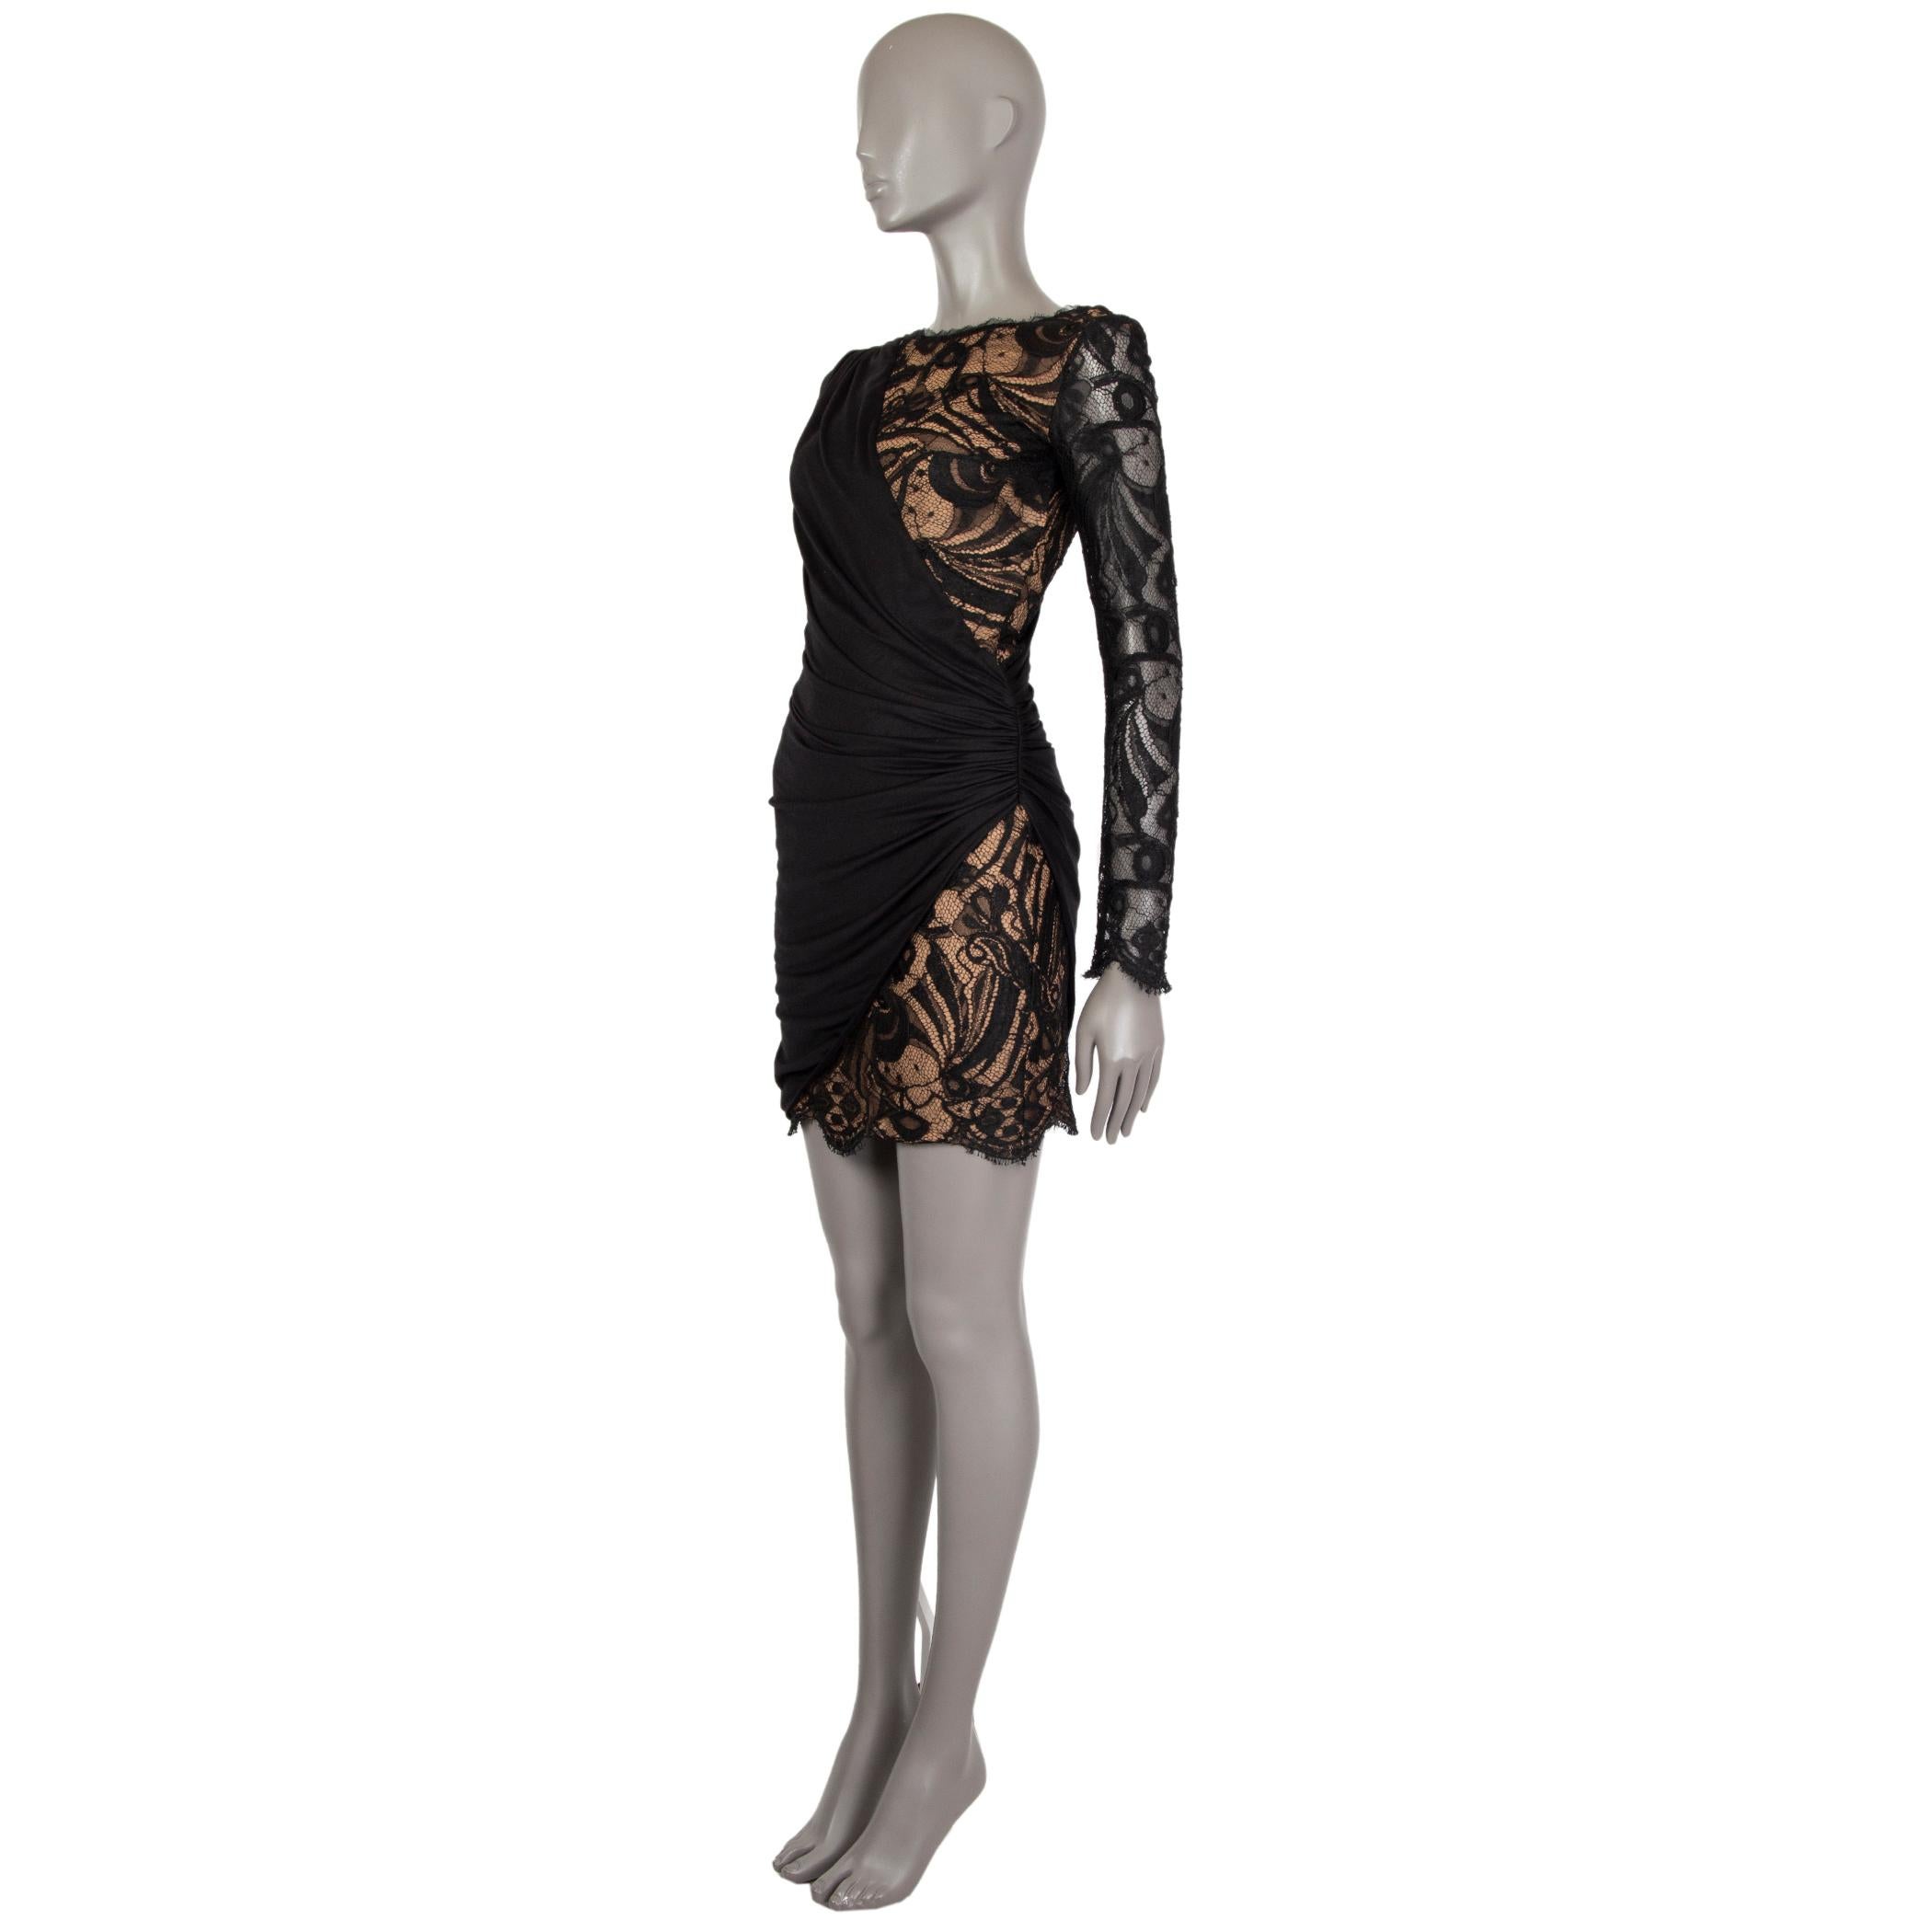 100% authentic Emilio Pucci long sleeve draped bodycon dress in black and nude wool jersey (96%) elastane (4%) with a jewel-neck. Trim is viscose (75%) and Polyamide (25%). Closes on the side with a concealed zipper. Lined in nude silk (100%). Has